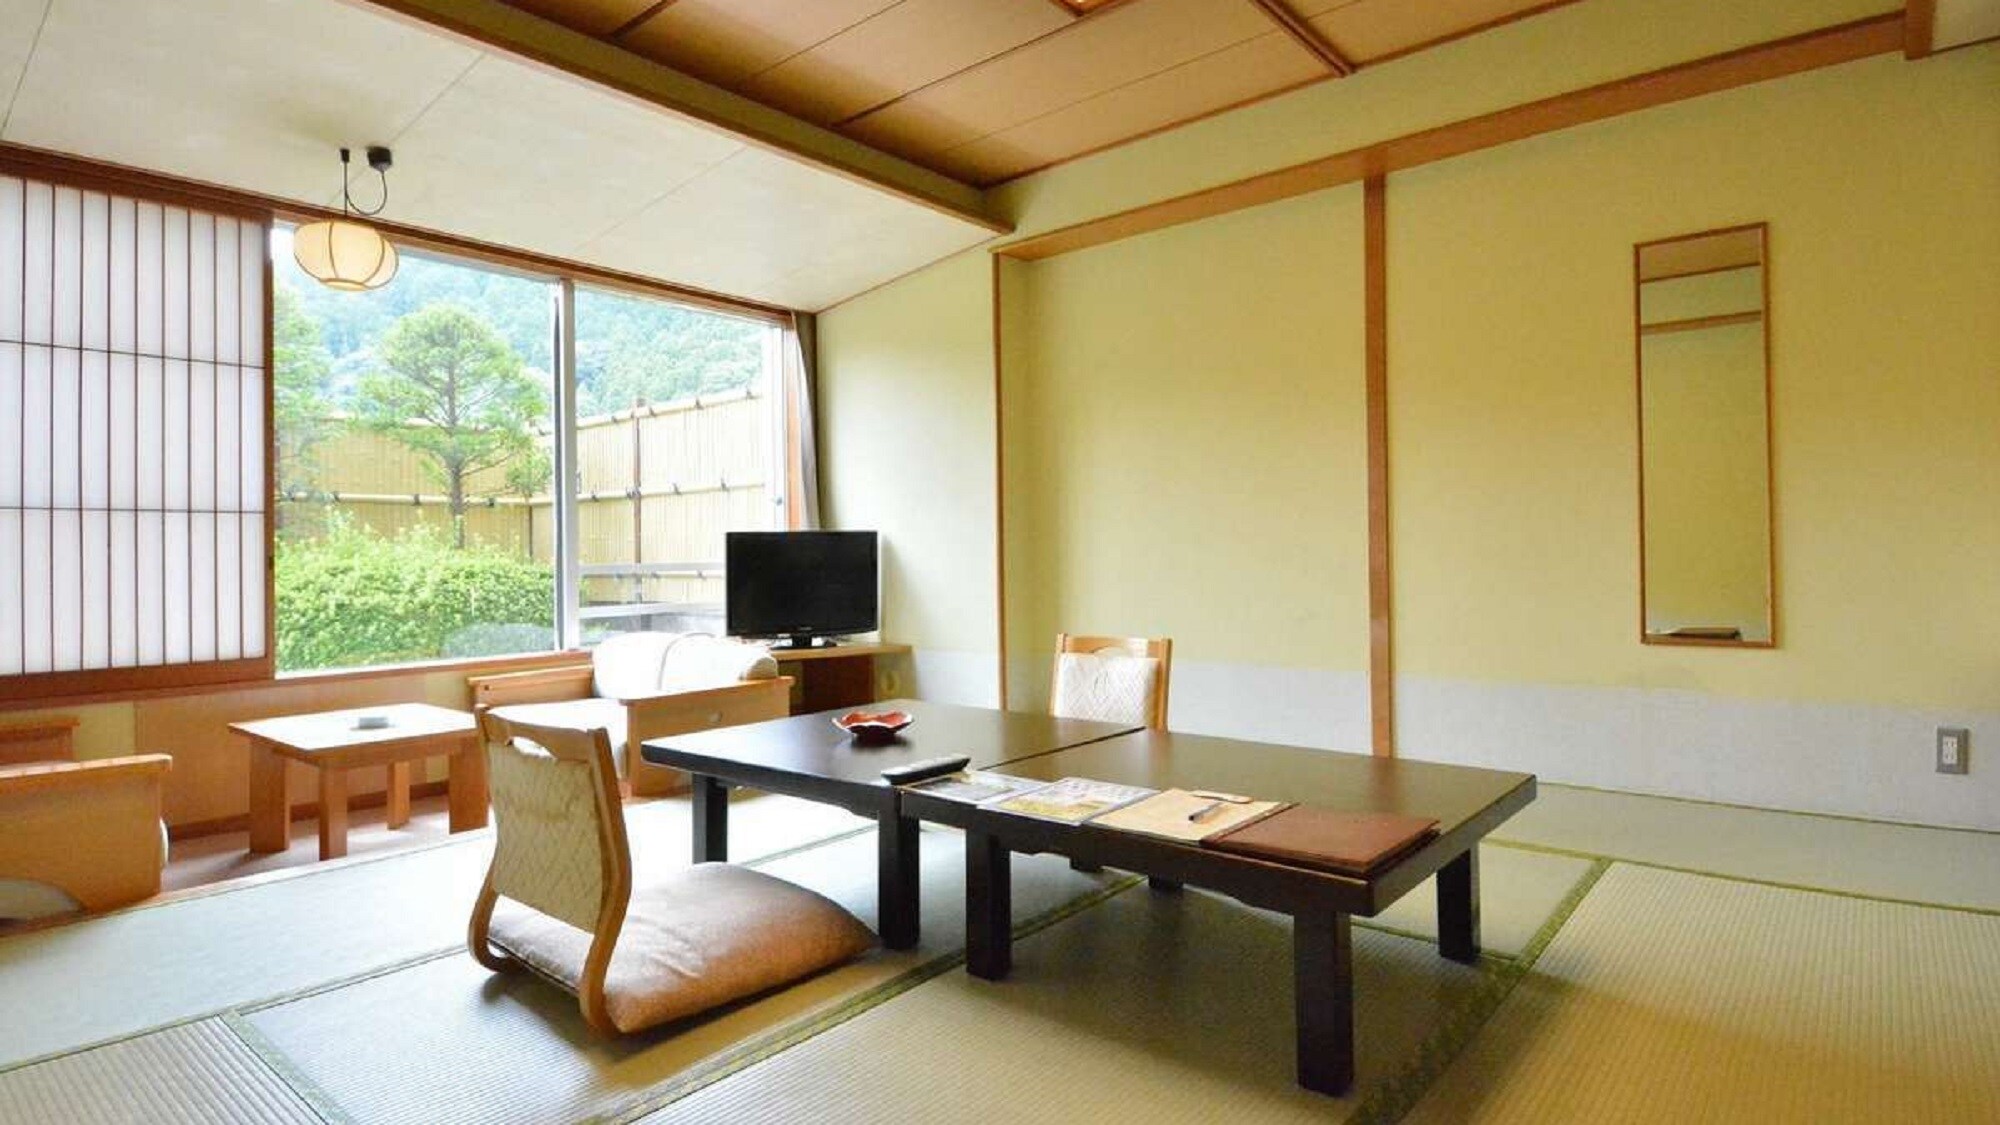 [General guest room] Japanese-style room 10 tatami mats + wide rim